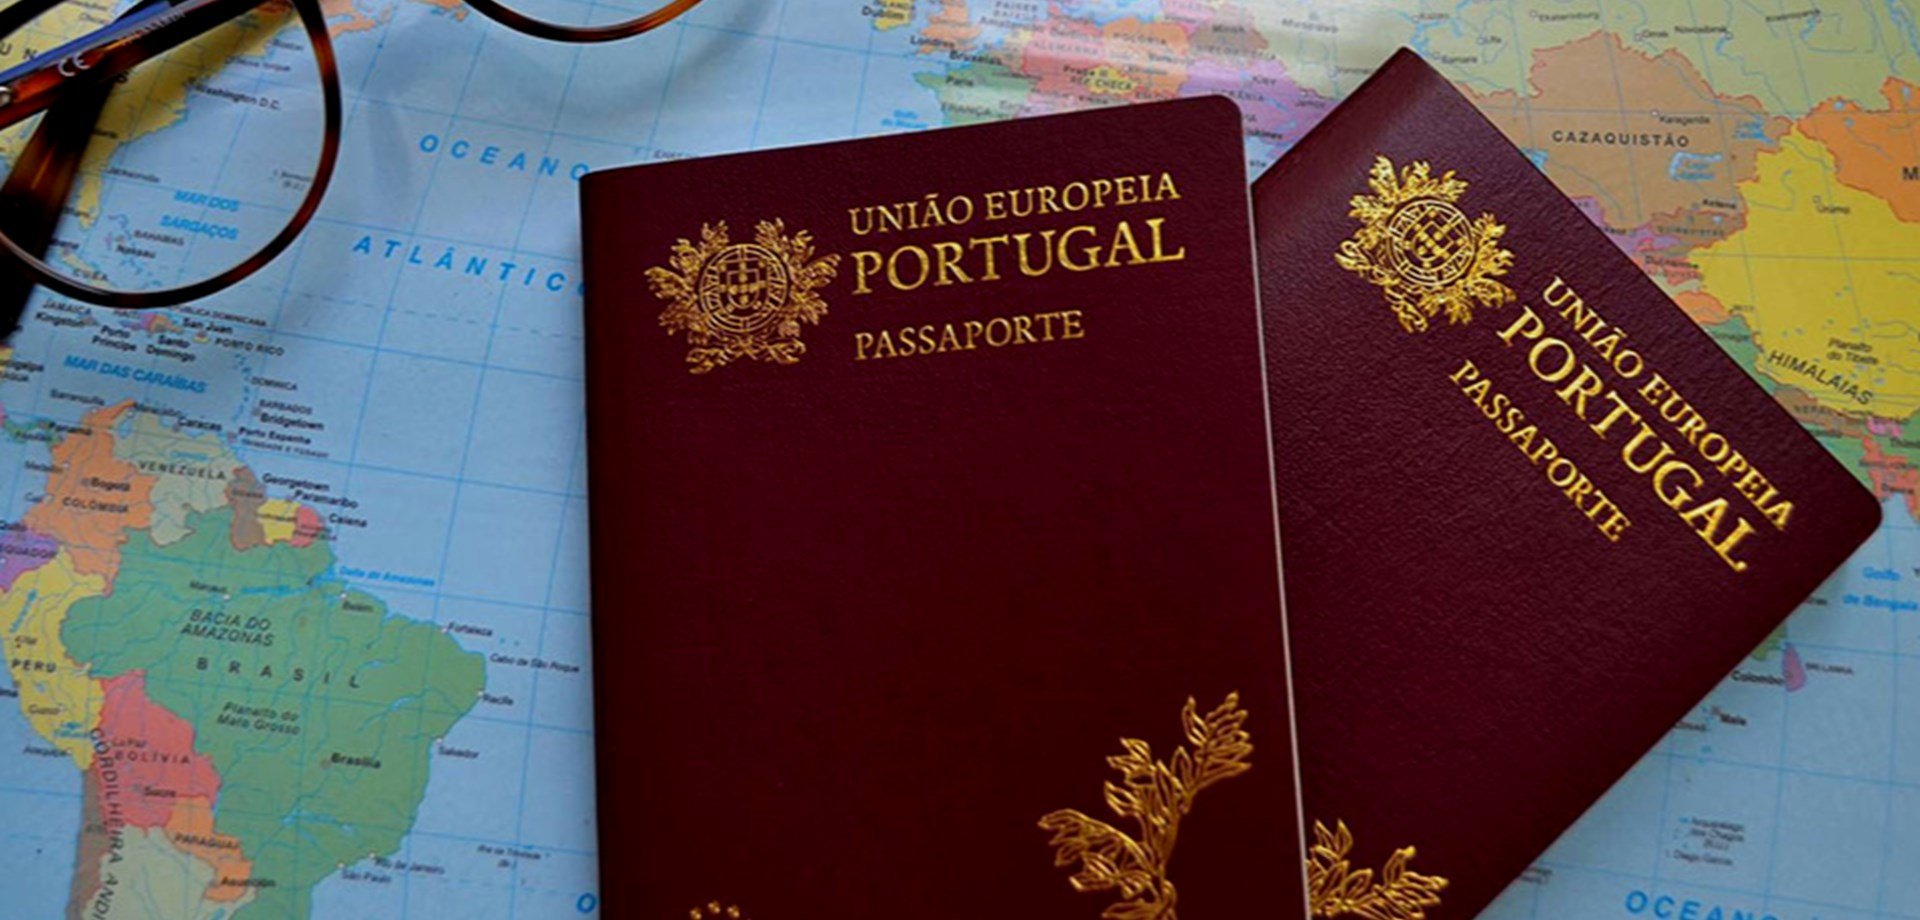 Portuguese passport more “powerful” - Over 54,000 foreigners asked for nationality in 2021